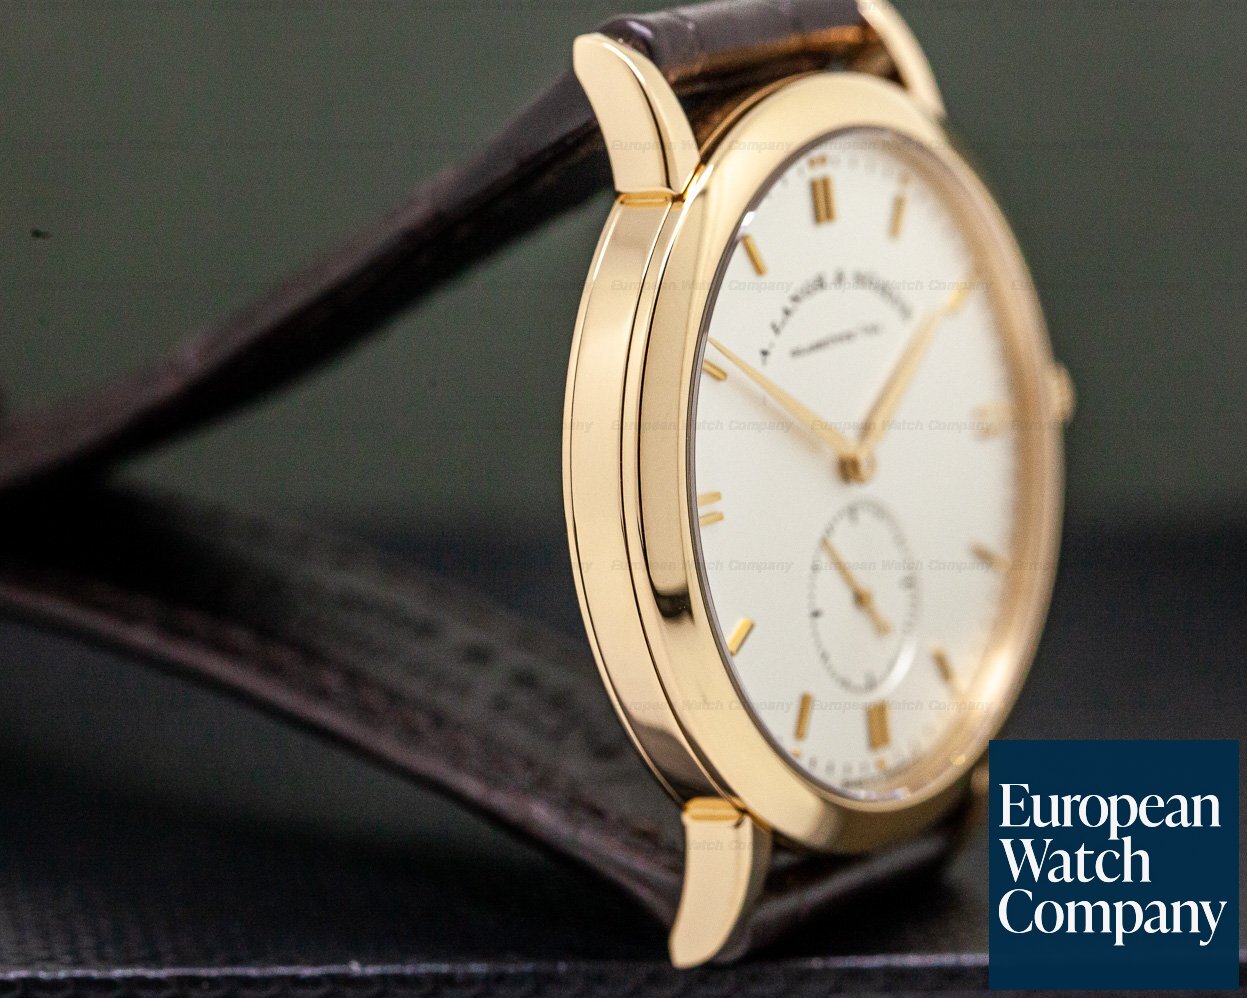 A. Lange and Sohne Saxonia Rose Gold Manual Wind 37MM Ref. 215.032